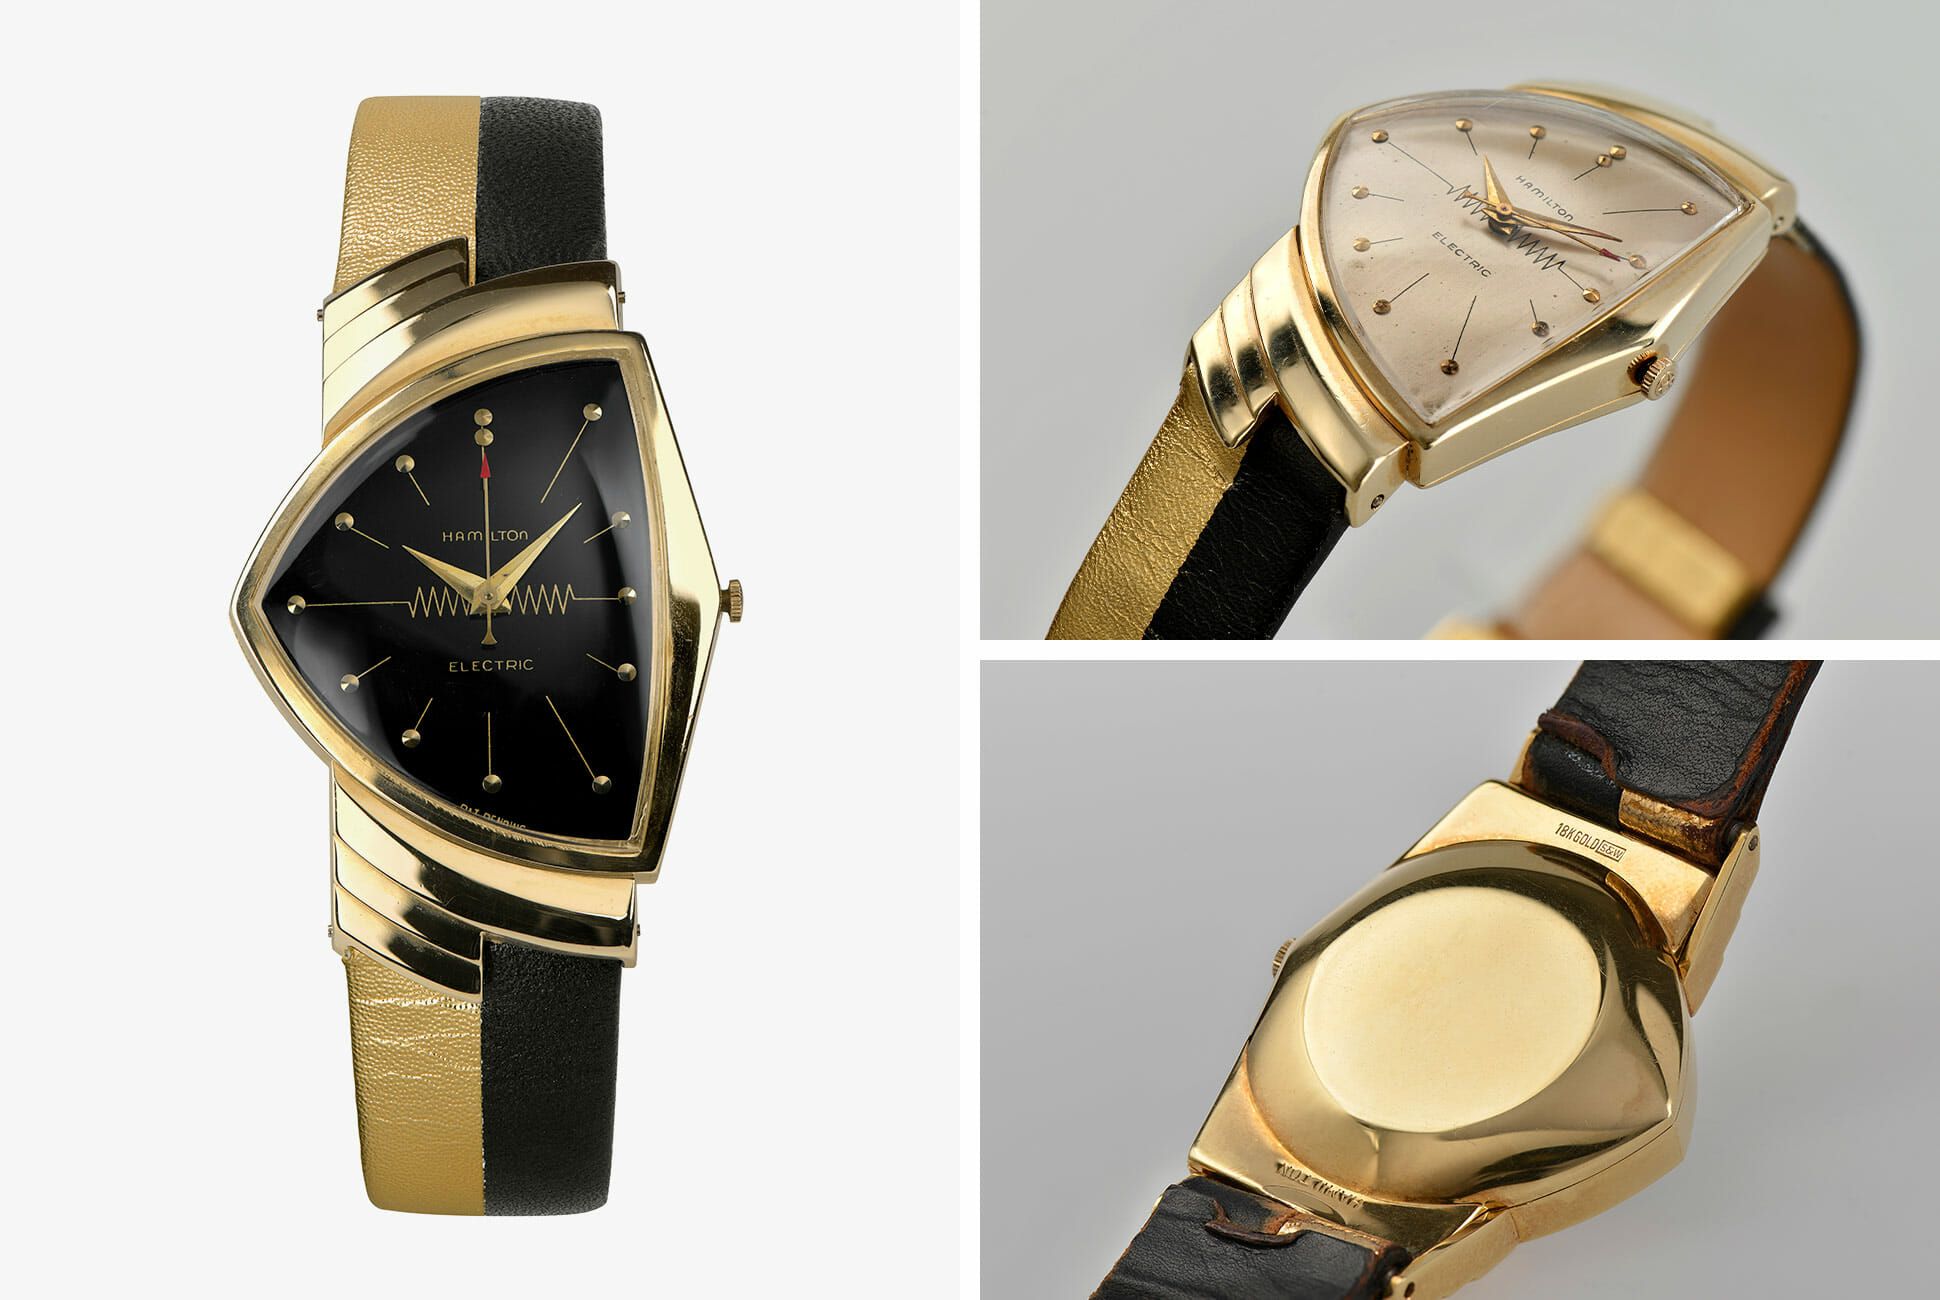 This Was the First Electric-Powered Watch, and It Still Looks